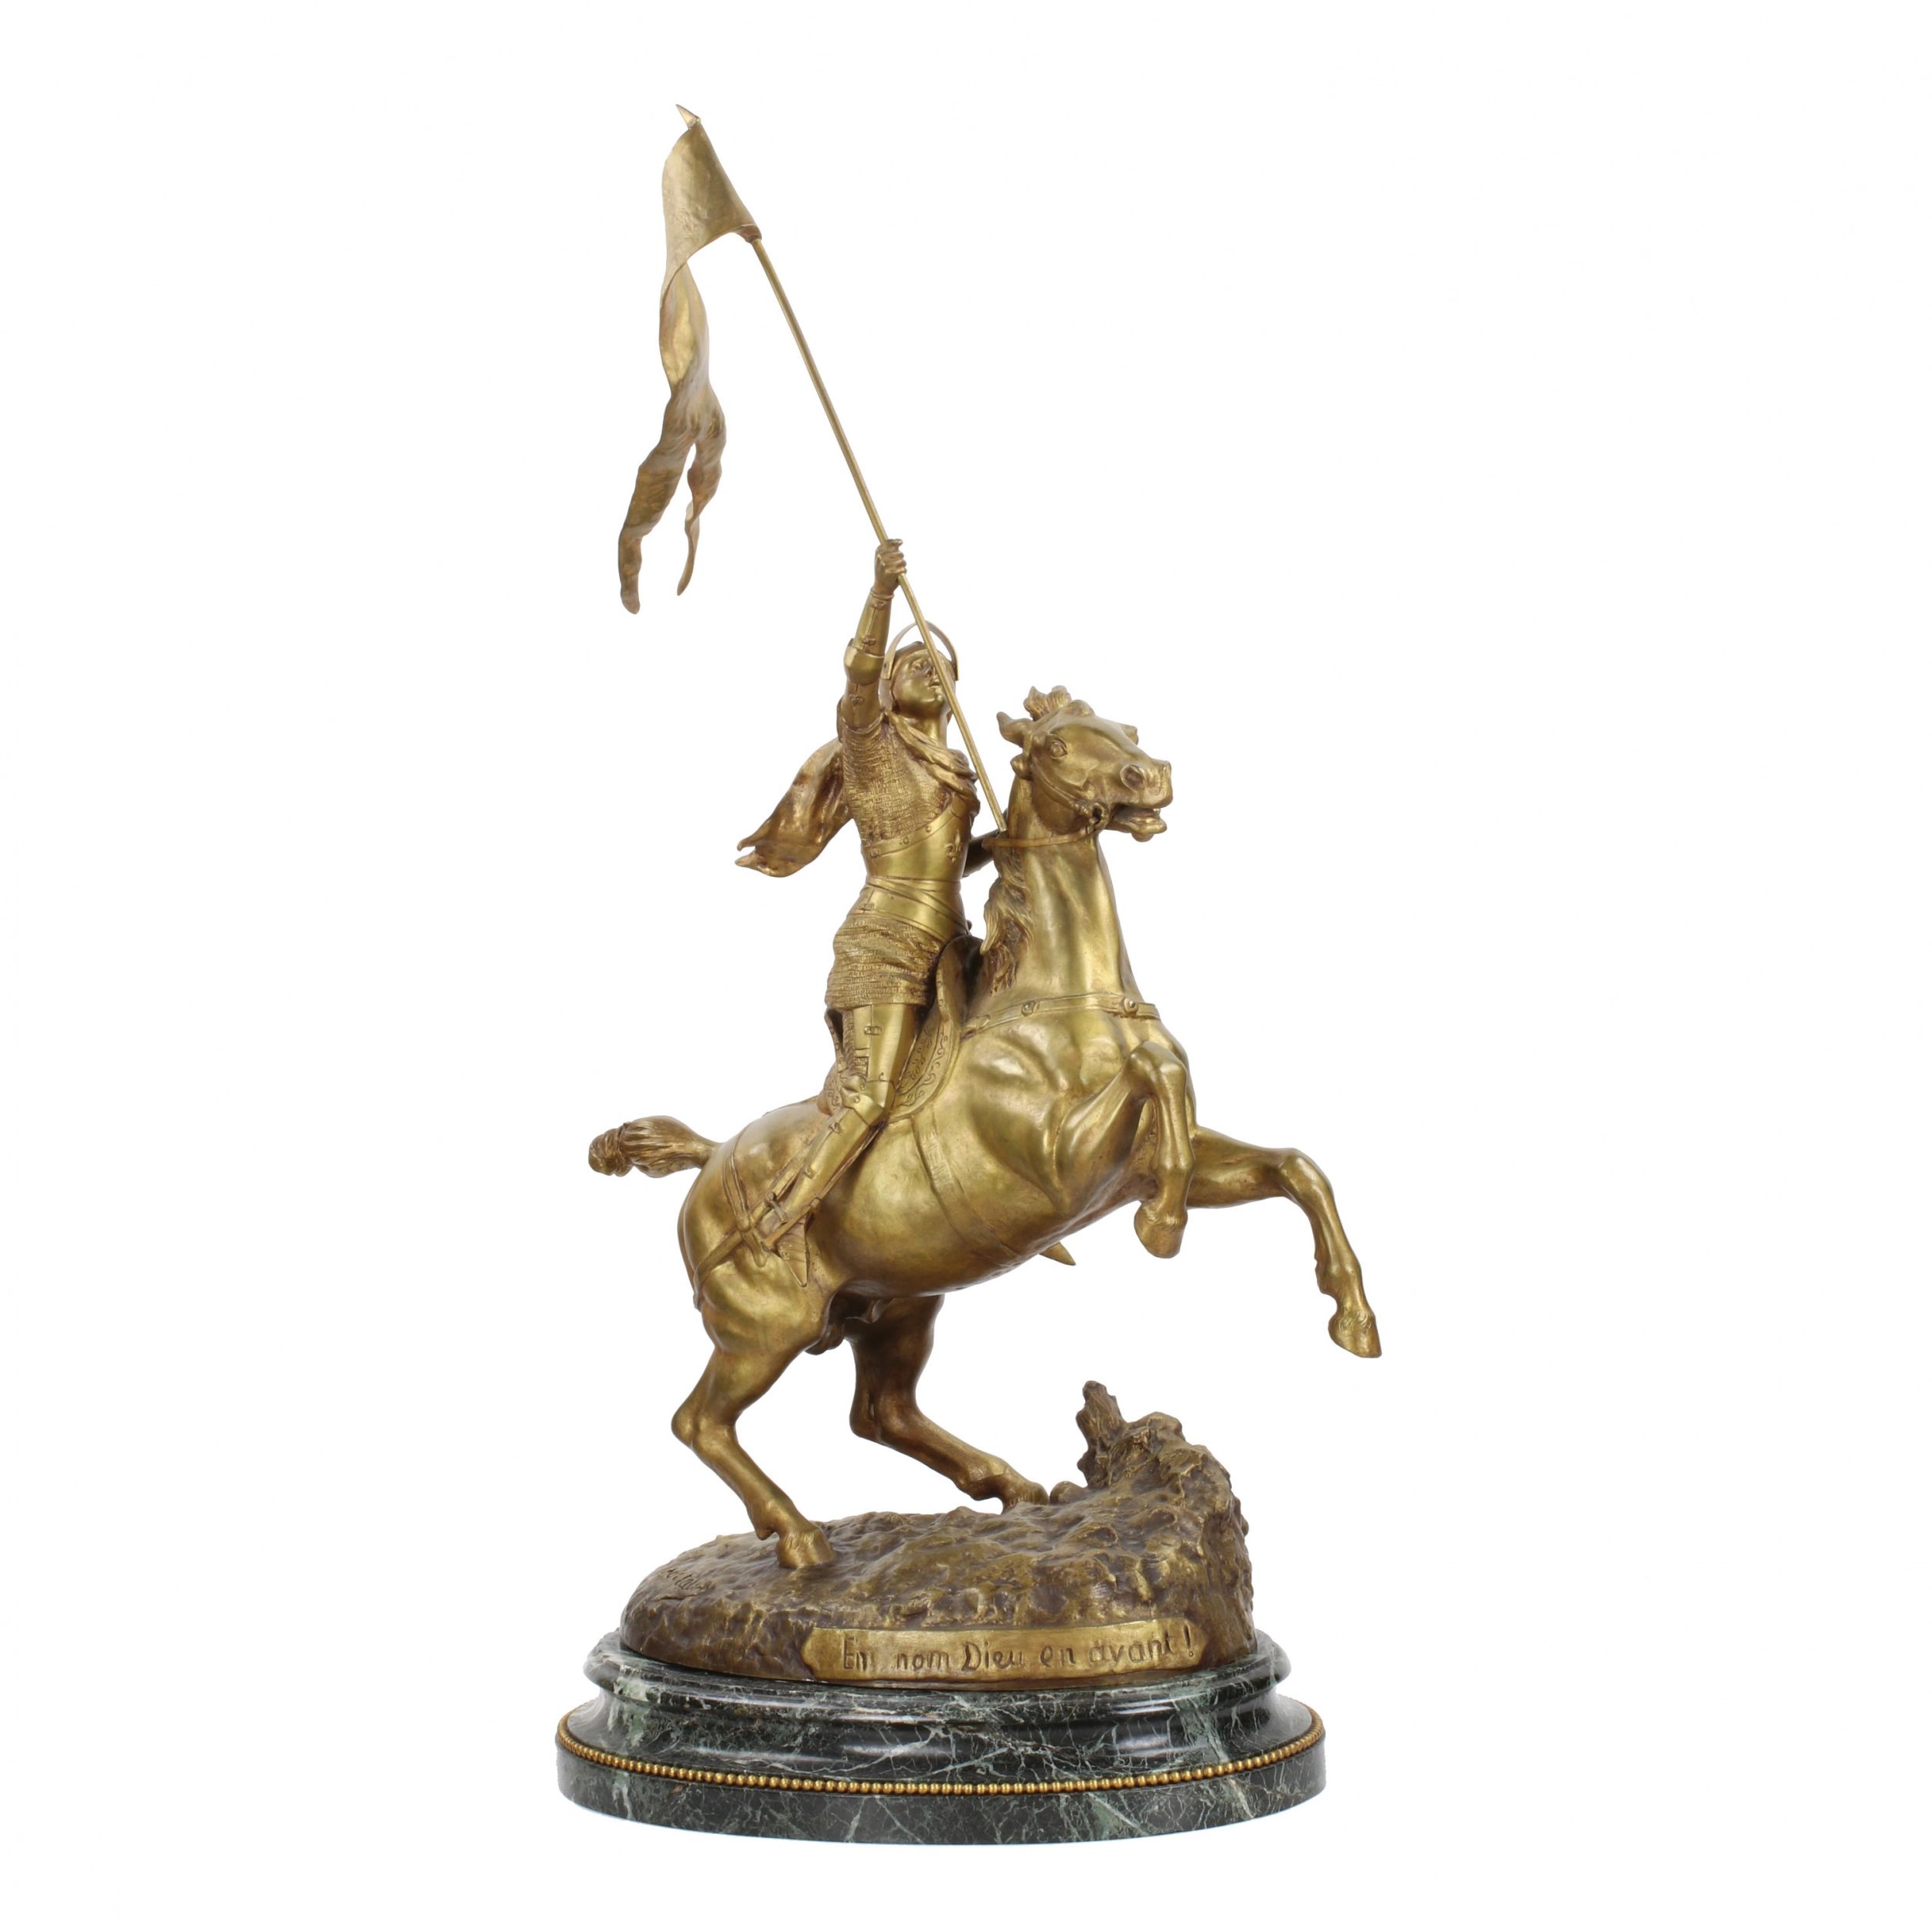 Heroic-bronze-of-an-equestrian-knight-